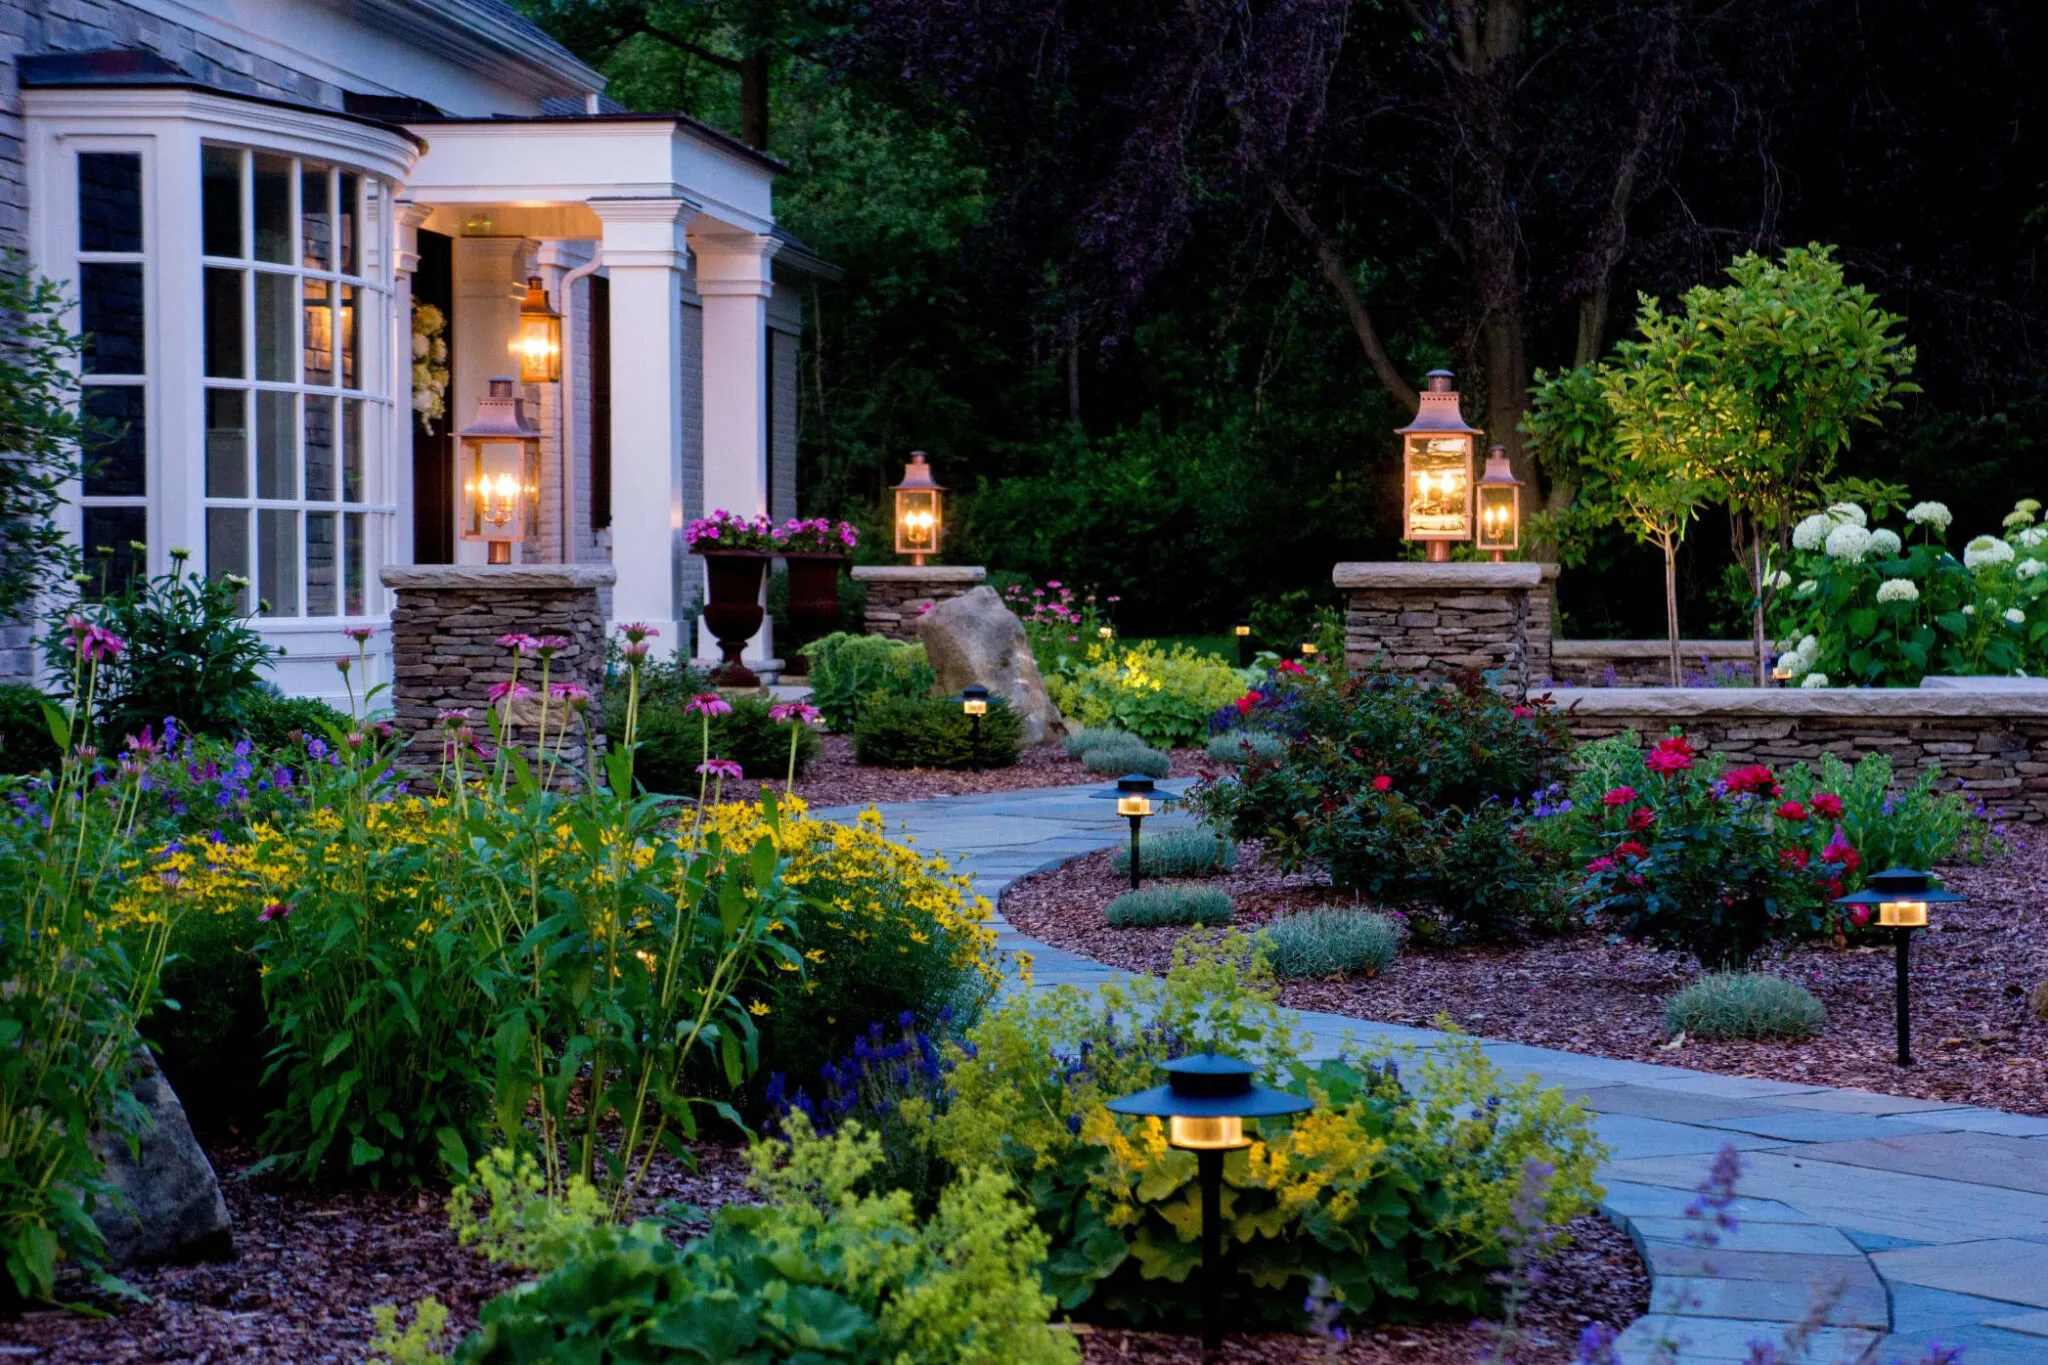 How to Decorate Outside With No Outlets